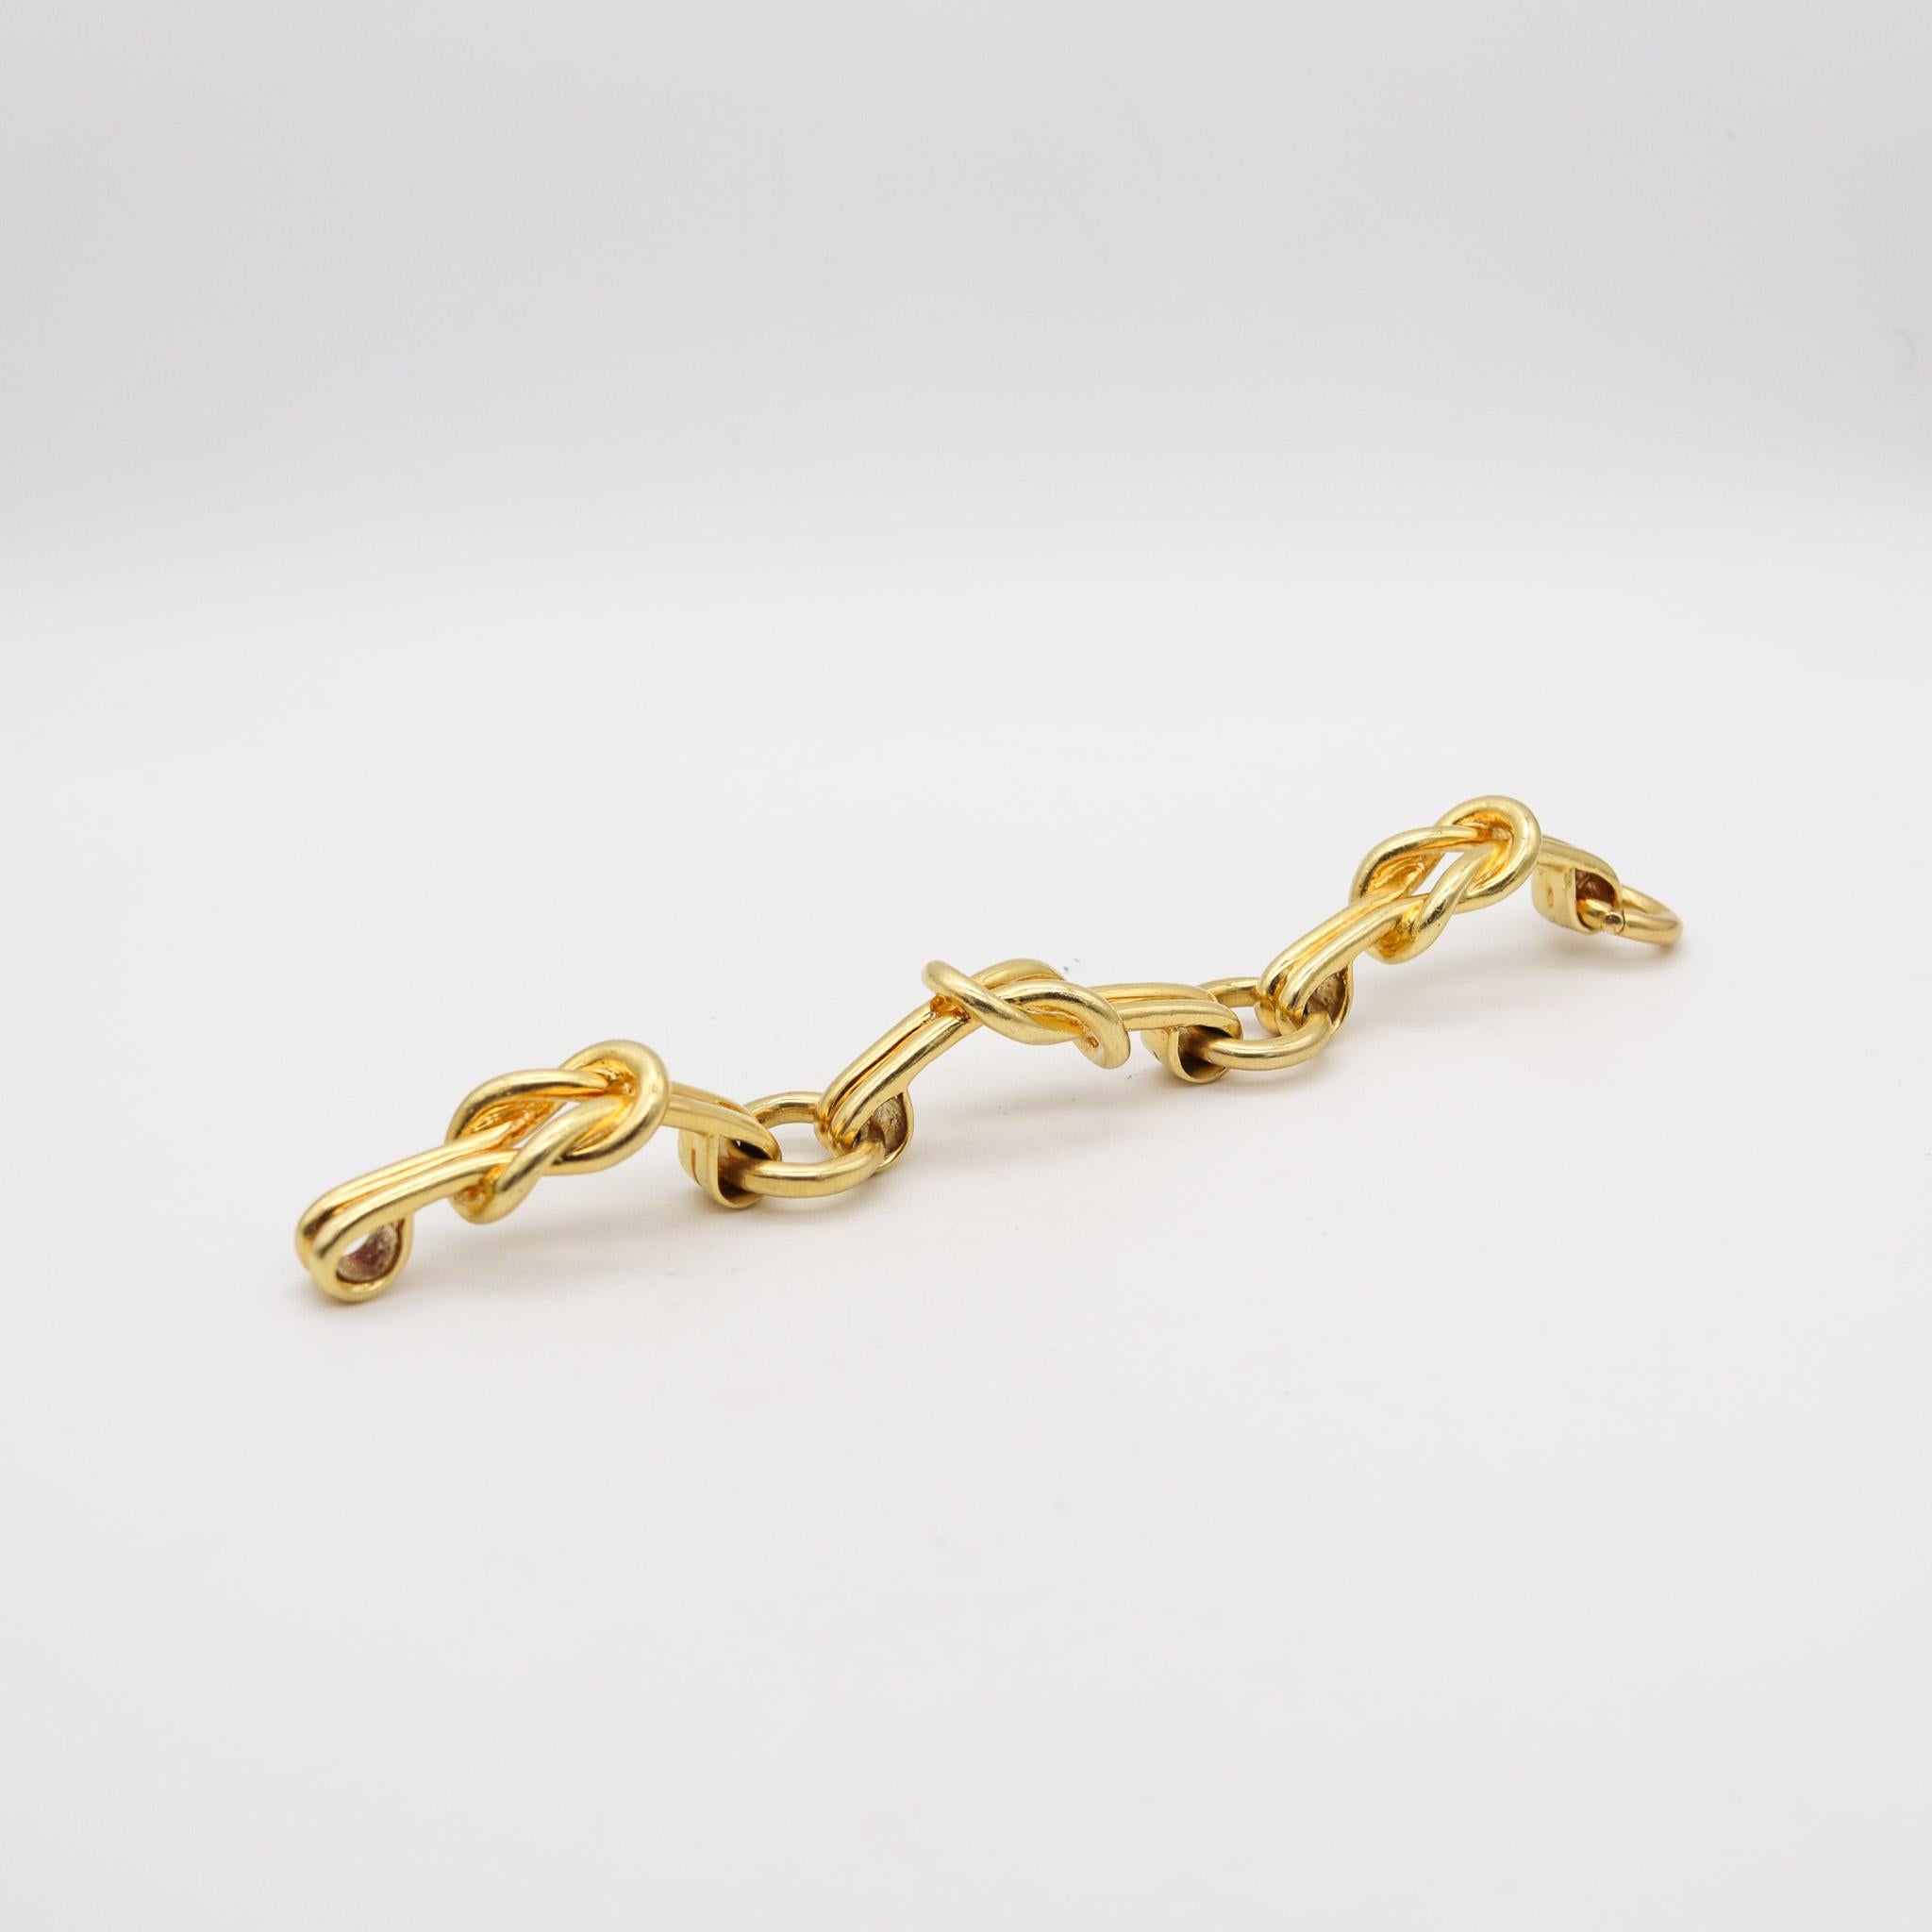 Cartier 1970 Hercules Knots Statement Links Bracelet In Solid 18Kt Yellow Gold For Sale 2